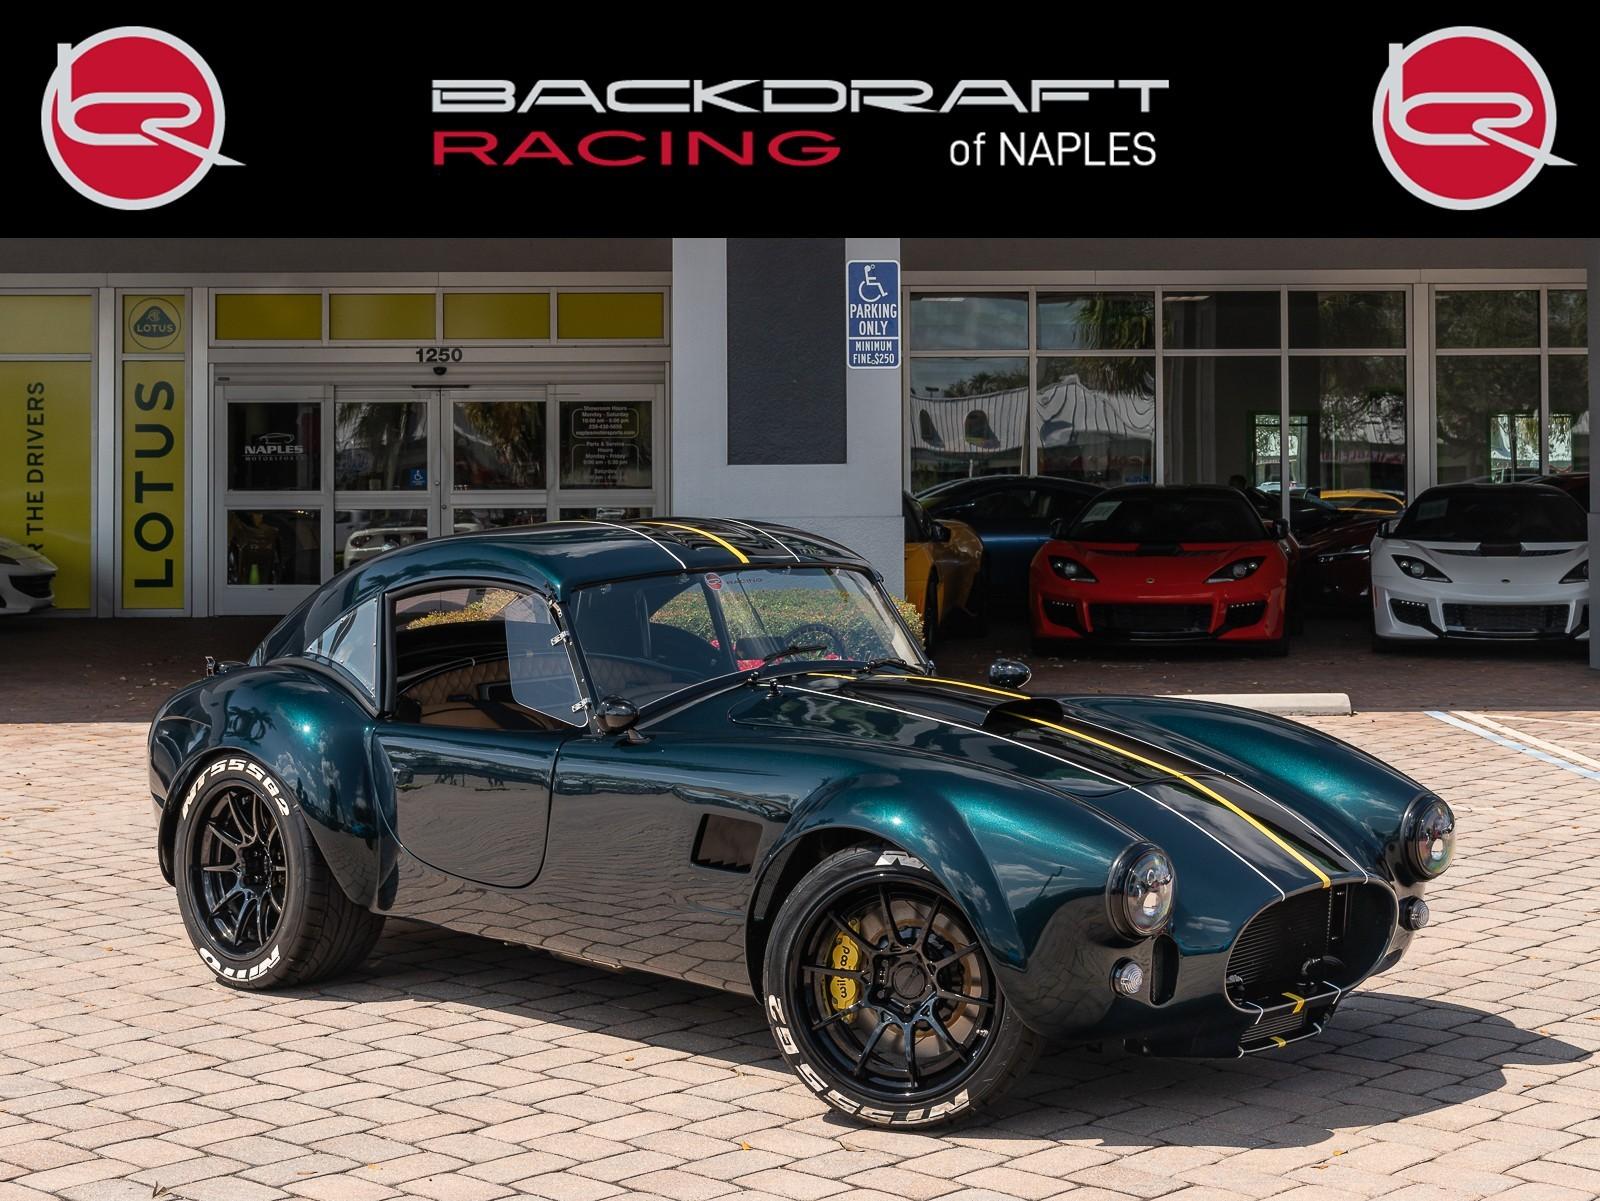 Used 1965 AC Backdraft Shelby Cobra Replica Sport For Sale (Sold) Motorsports Inc - Vanderhall of Naples Stock #23-MT1014